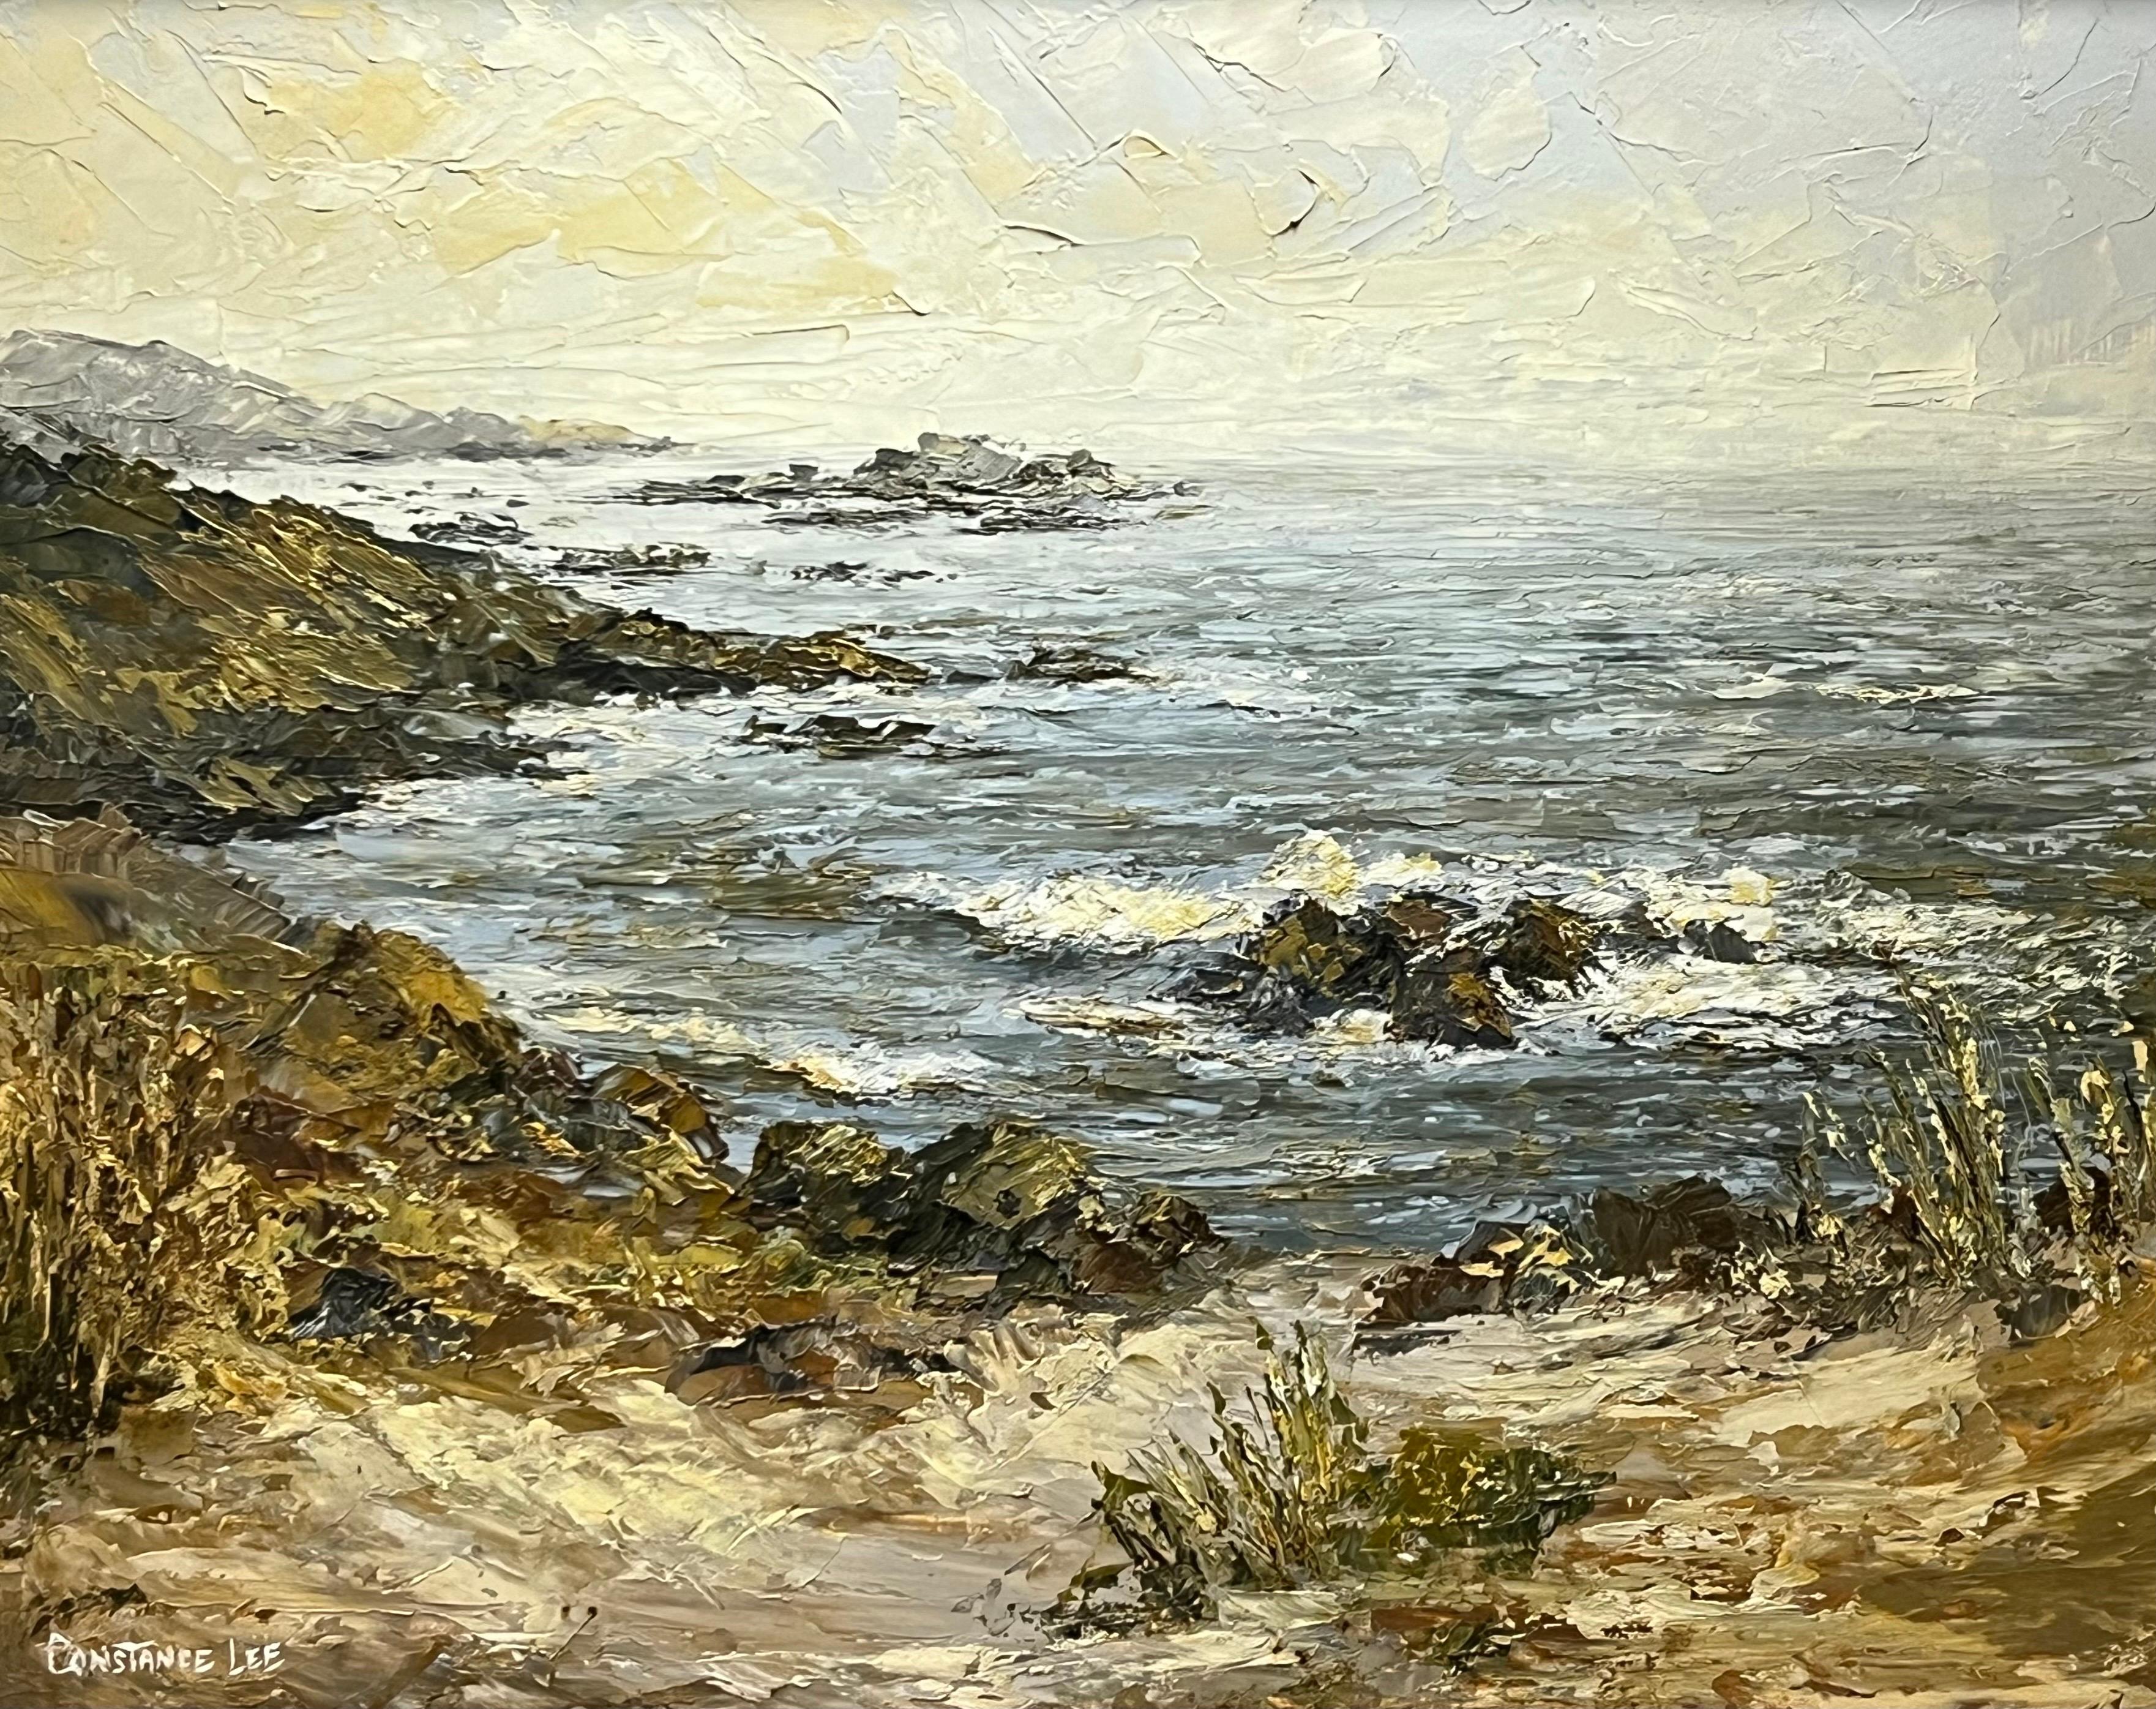 Californian Coastline Seascape Landscape Impasto Oil Painting by 20th Century Artist, Constance Lee 

Art measures 19 x 15 inches
Frame measures 21 x 17 inches 

This unique original painting captures the sea crashing onto the rocks on the